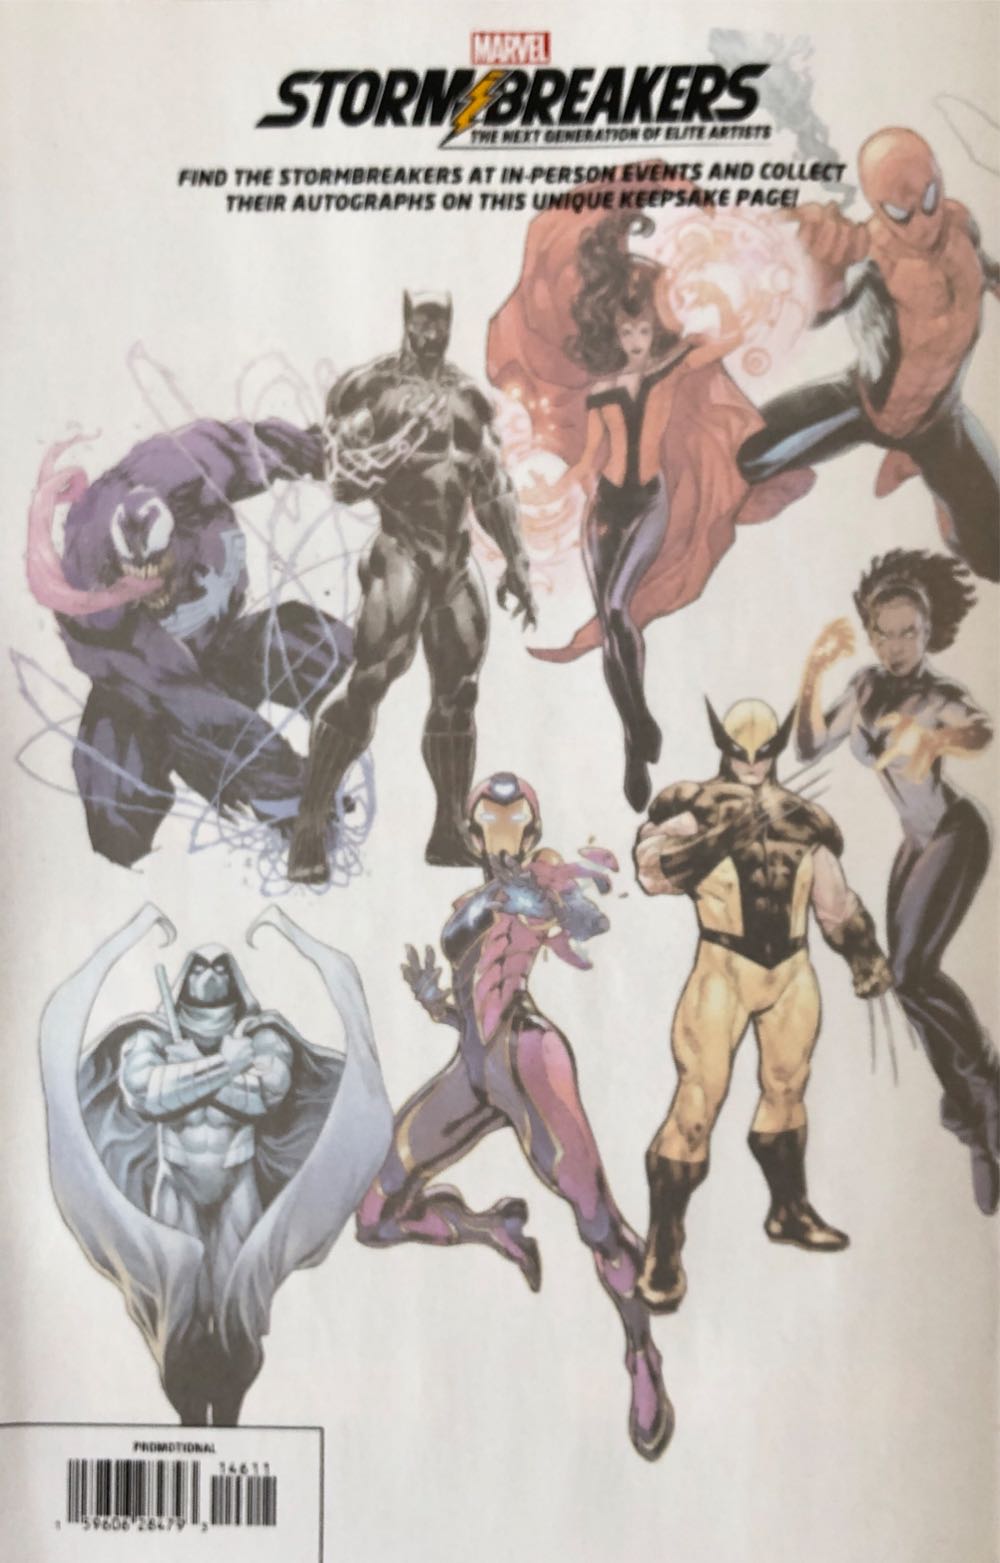 StormBreakers Sketchbook (2023) - Marvel (1 - Apr 2023) comic book collectible [Barcode 15960628479314611] - Main Image 4